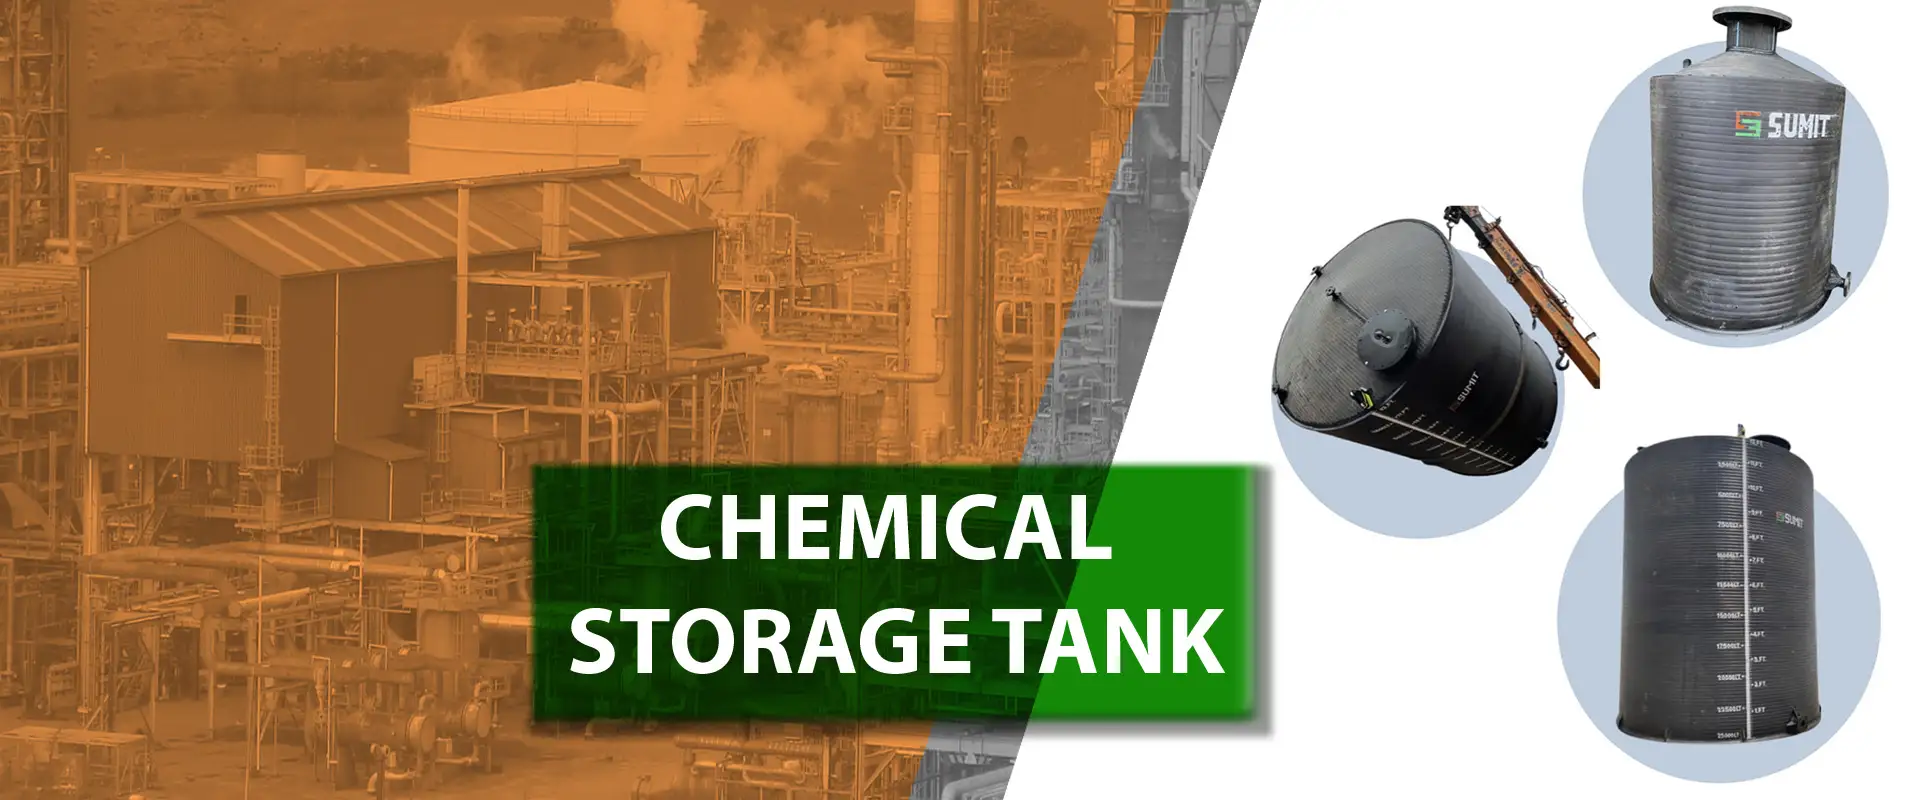 chemical storage equipments in South Africa